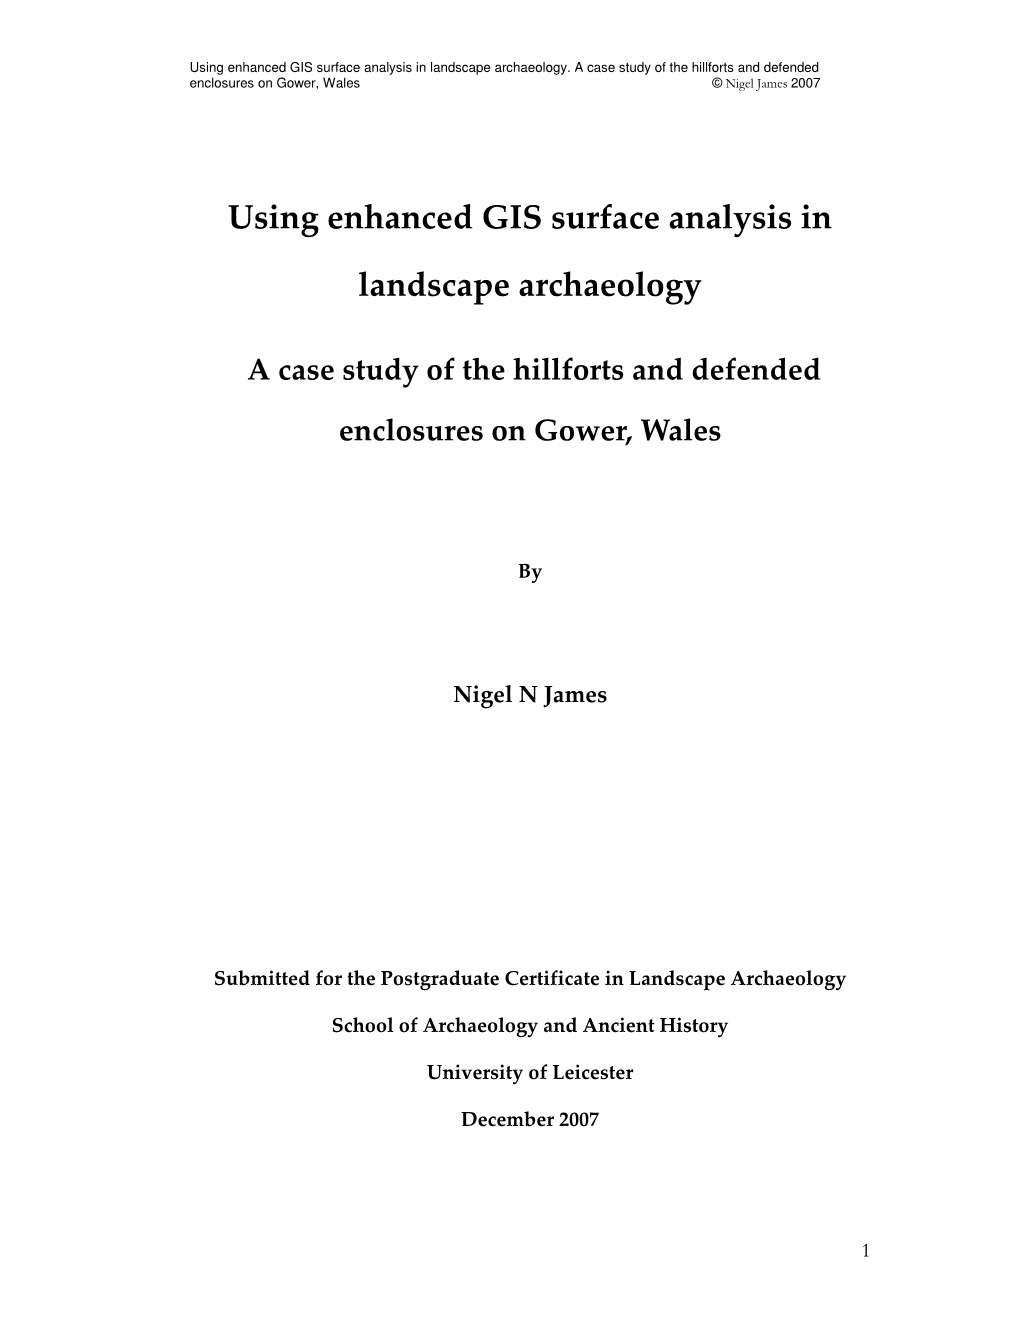 Using Enhanced GIS Surface Analysis in Landscape Archaeology